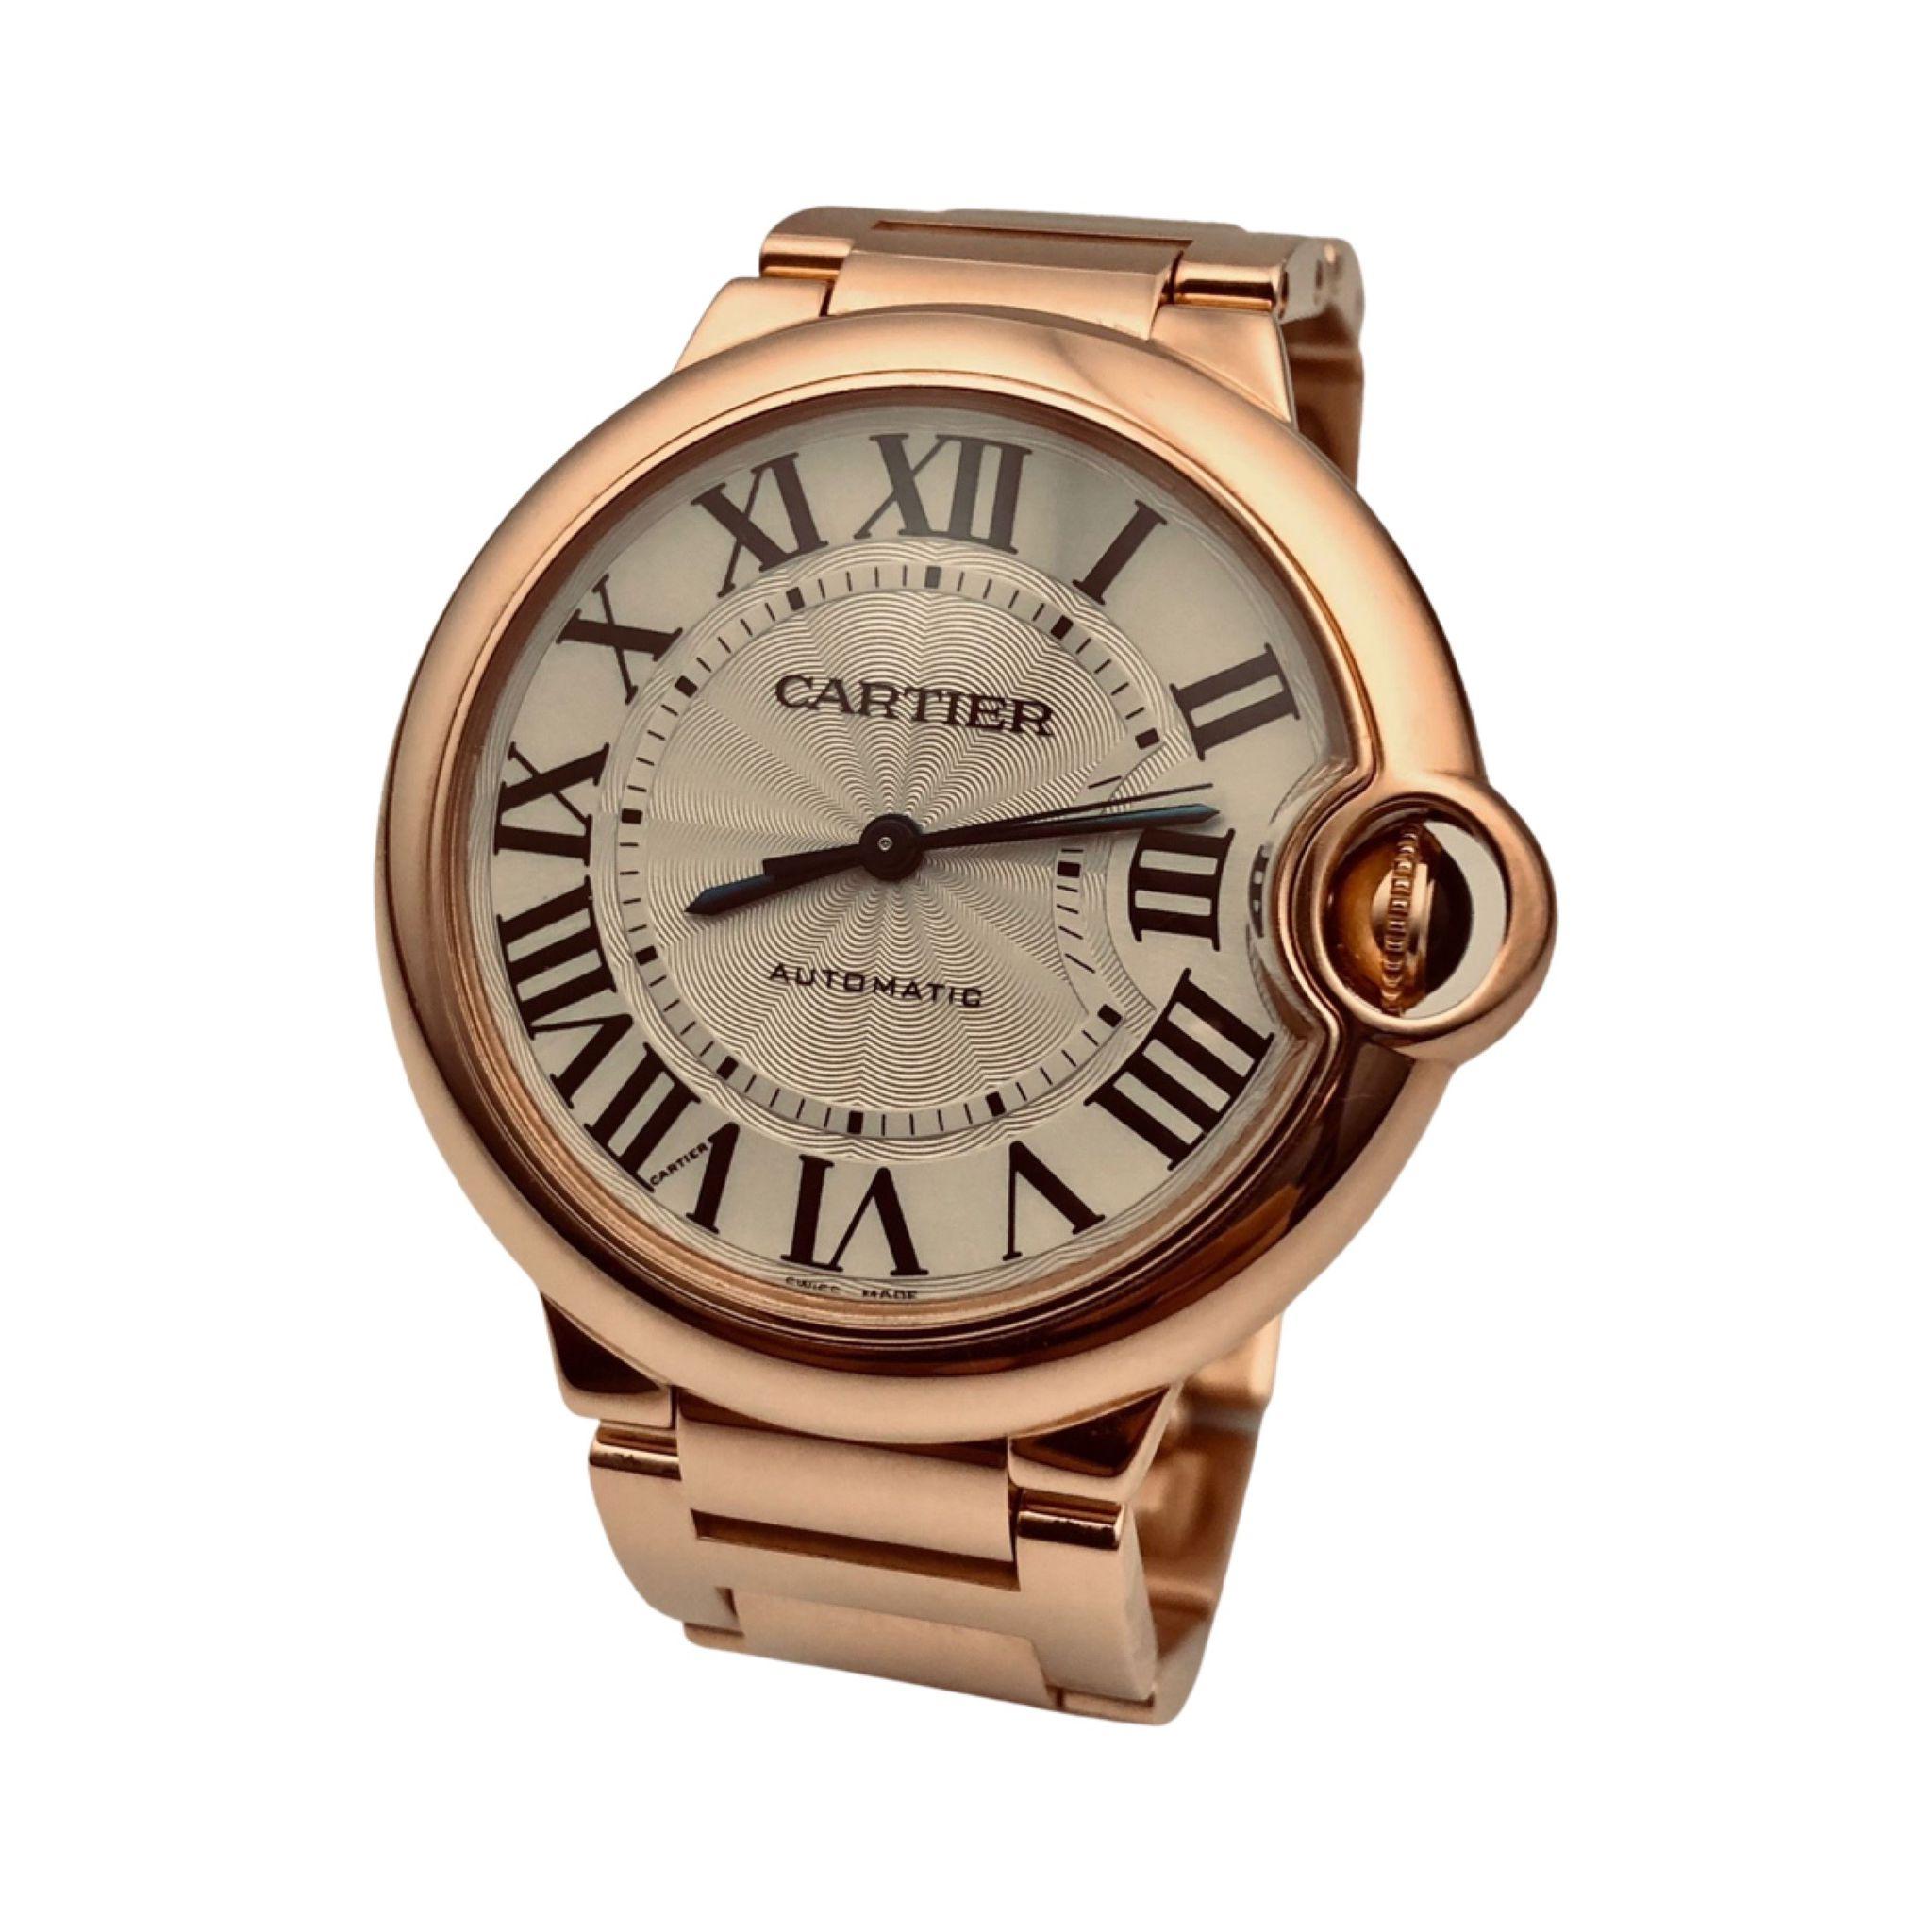 Cartier Ballon Bleu medium size (36.6mm) in 18K rose gold case, guilloché and lacquered dial with Roman numerals, automatic winding Cartier calibre 076 movement, 18K rose gold bracelet. 
Water resistant to 30 meters.
Excellent condition, comes with